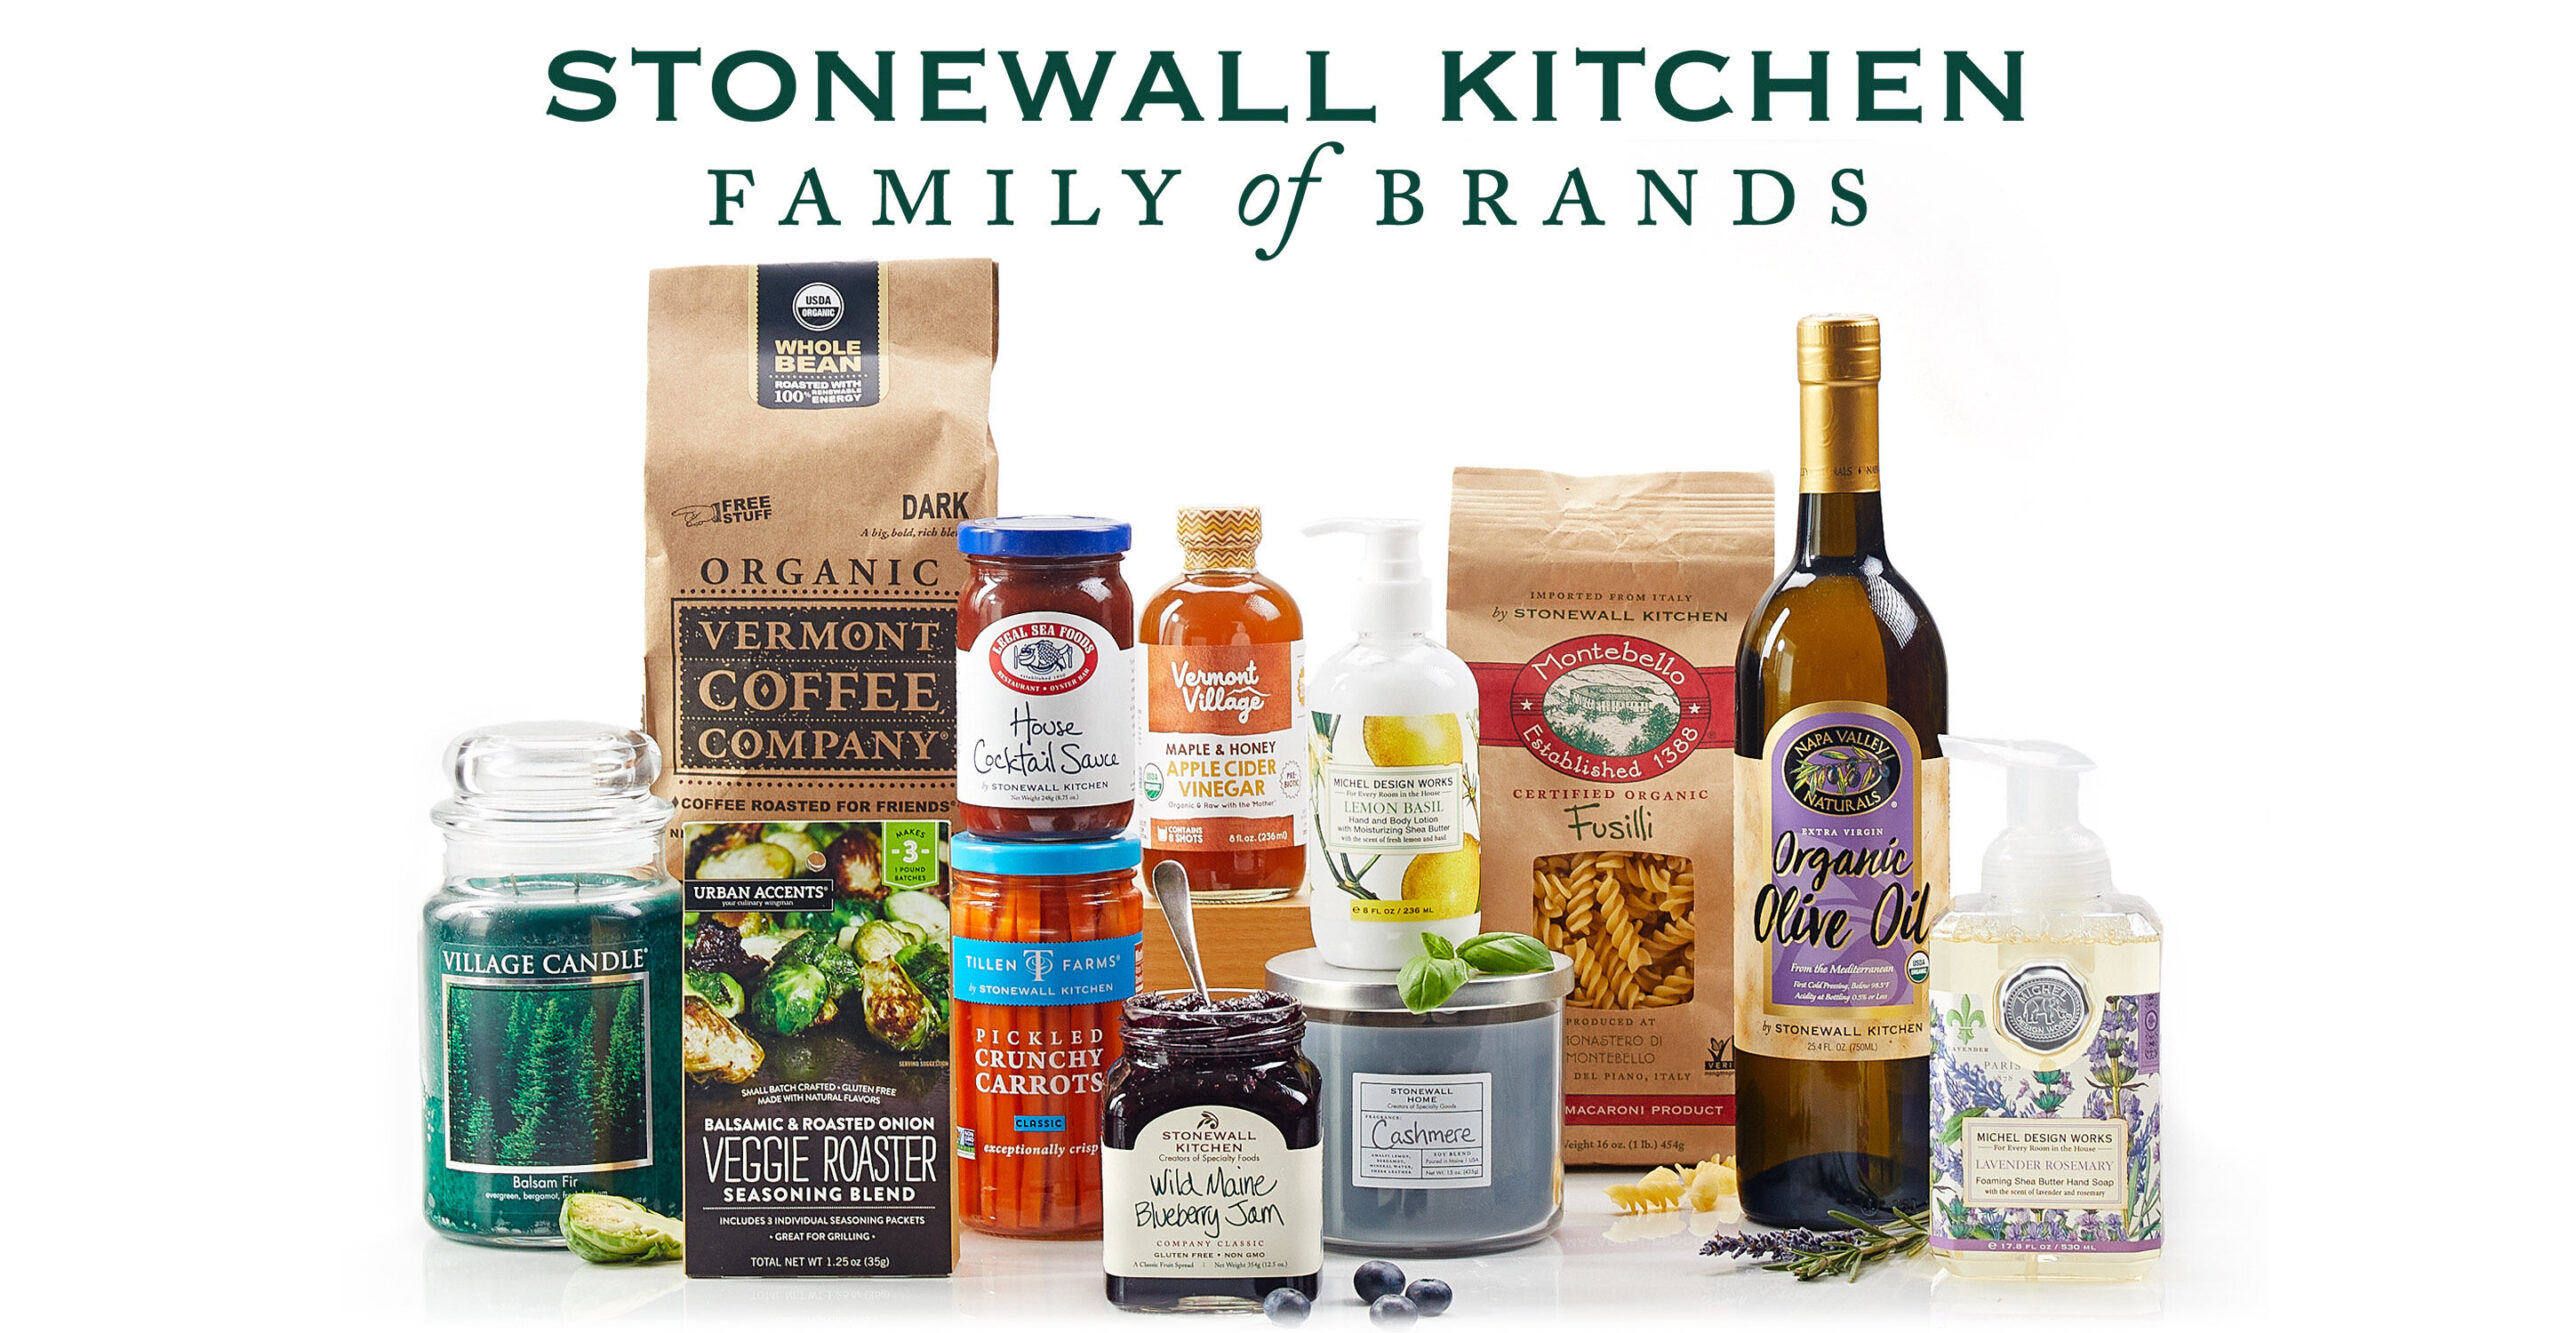 Step up your culinary game with Stonewall Kitchen!